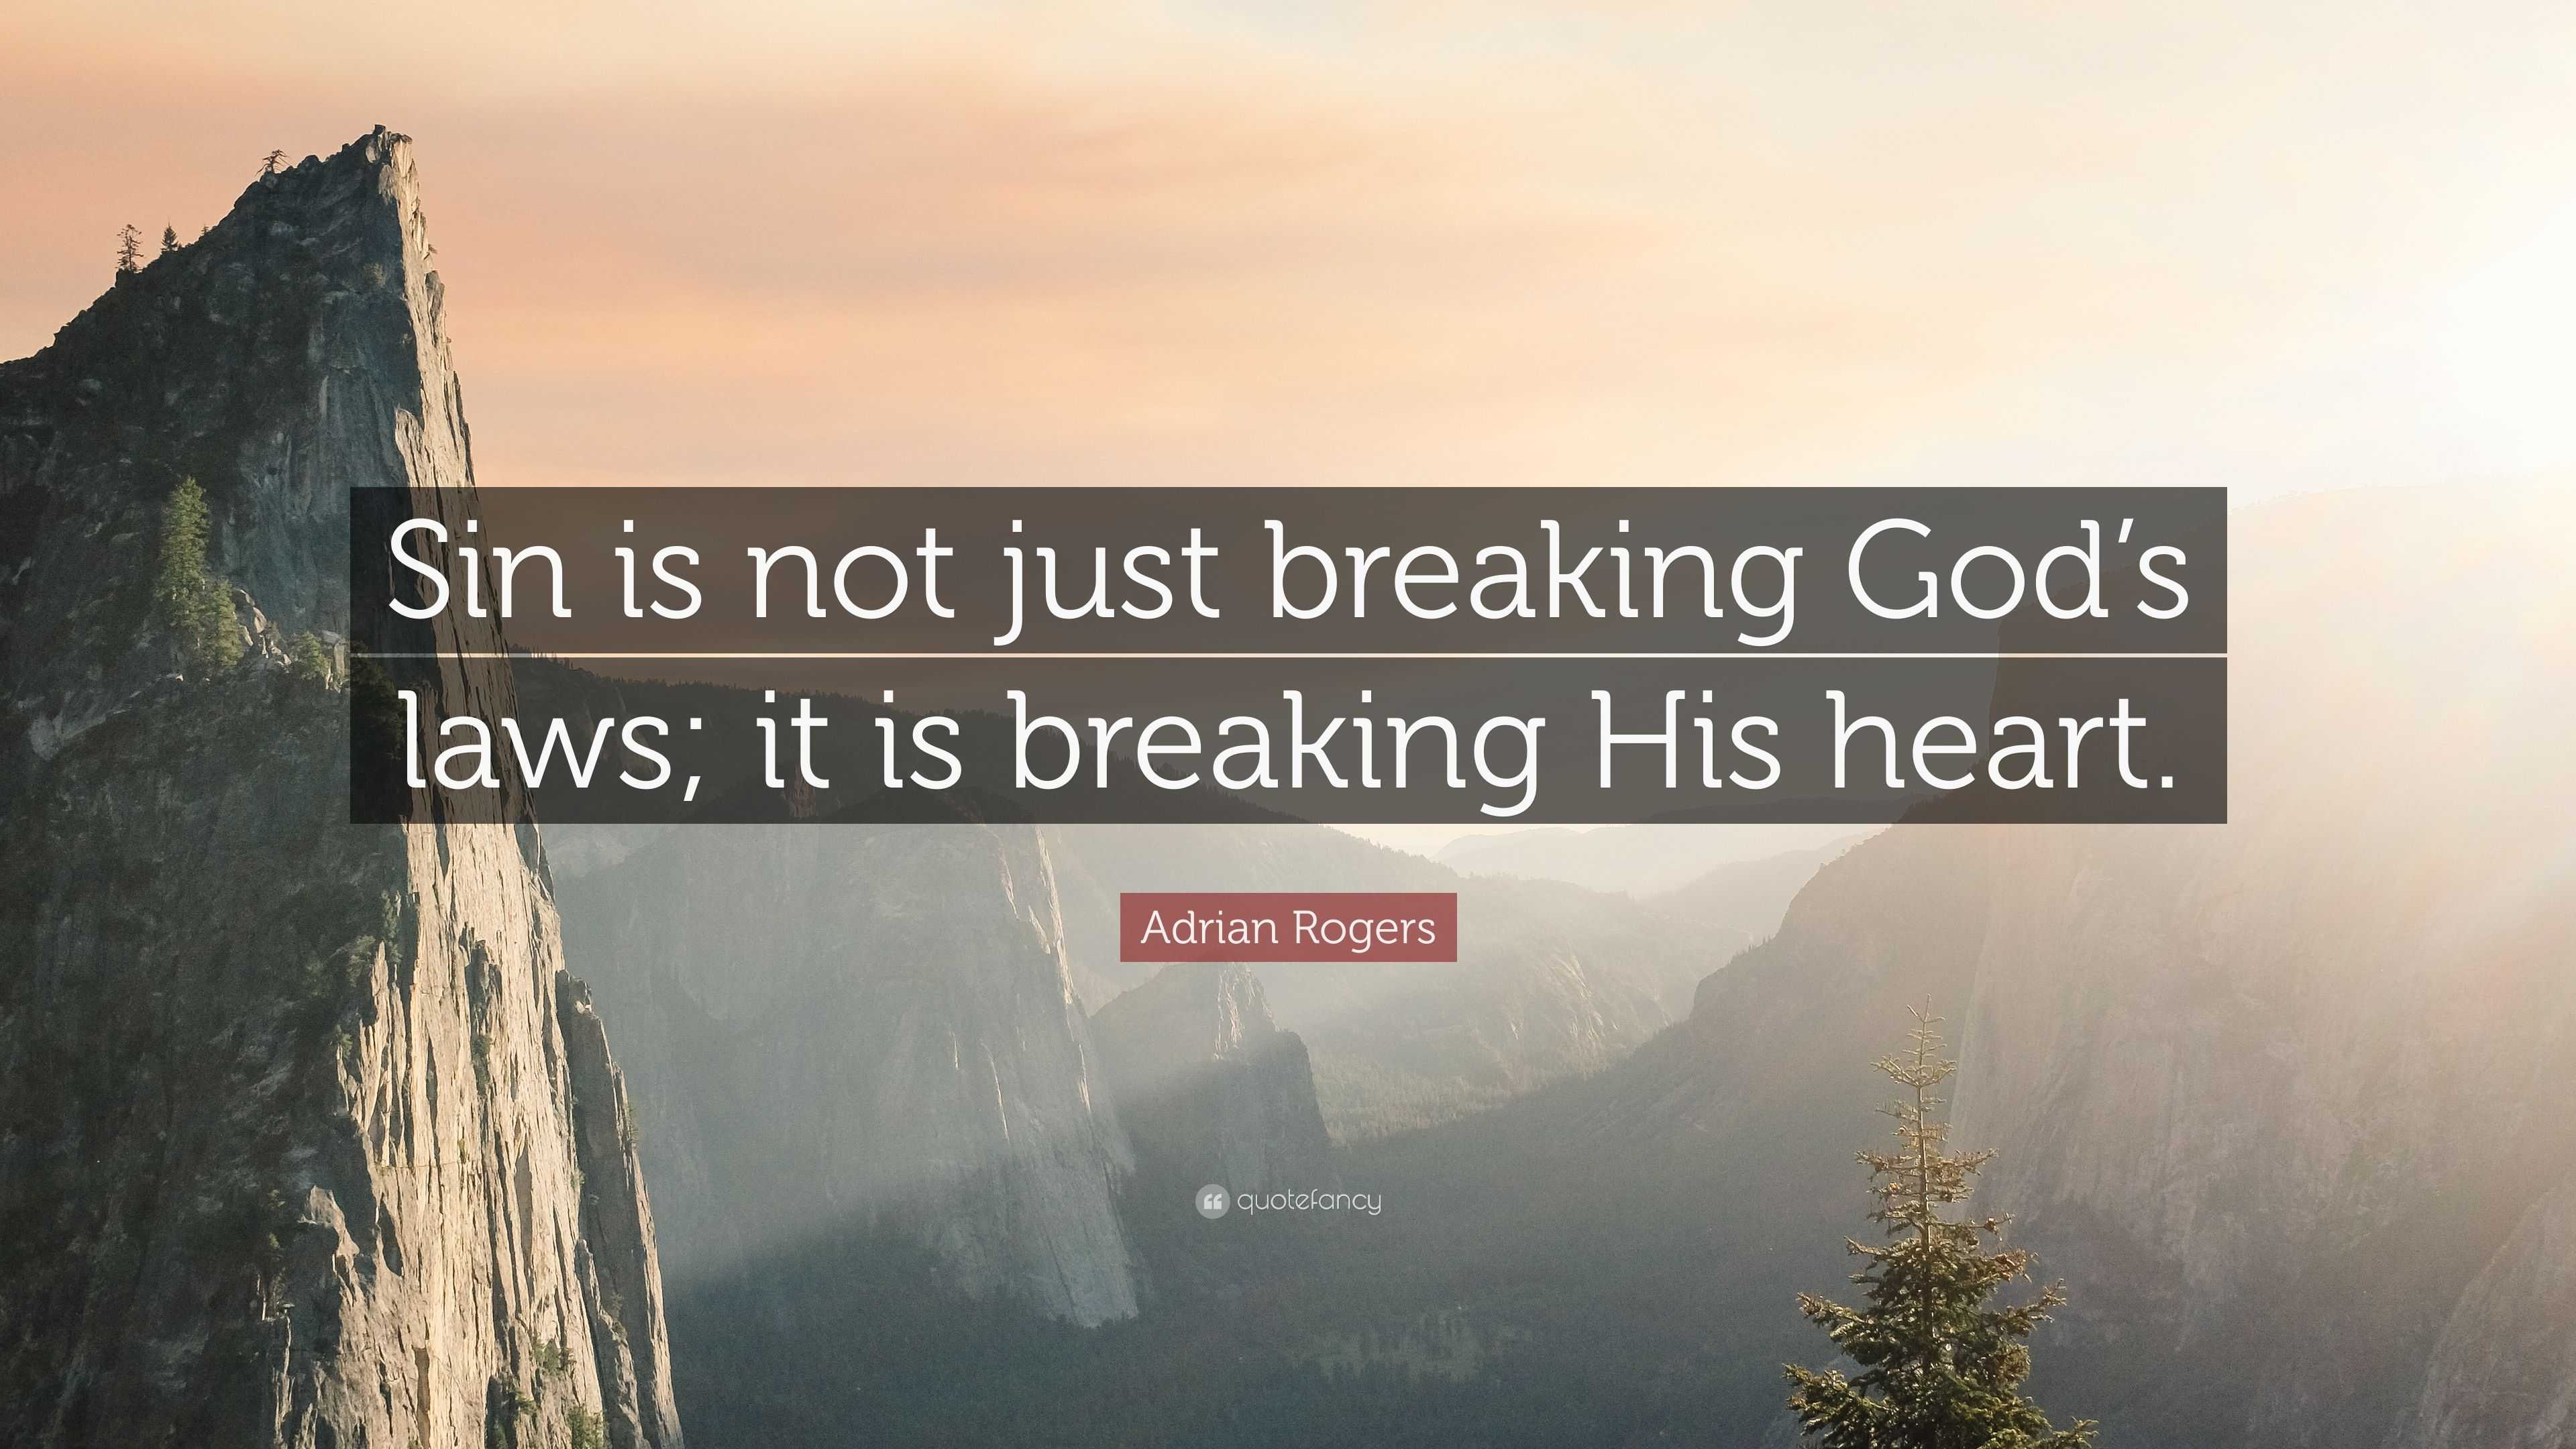 Adrian Rogers Quote: “Sin is not just breaking God's laws; it is breaking  His heart.”